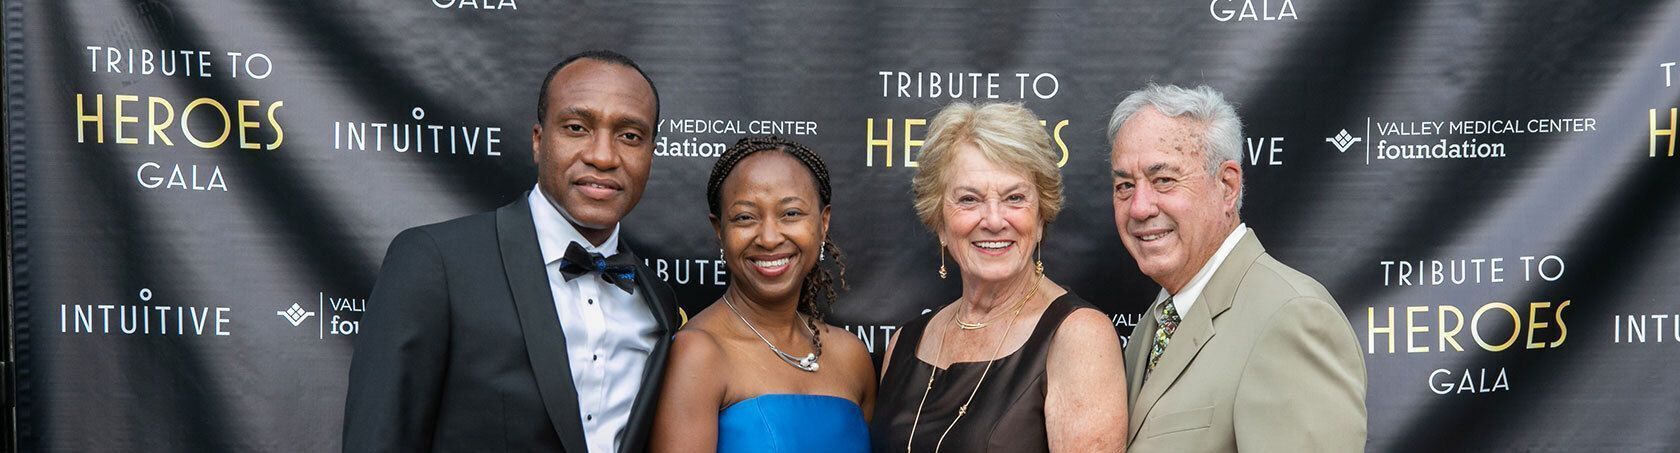 Valley Health Foundation Tribute To Heroes Gala